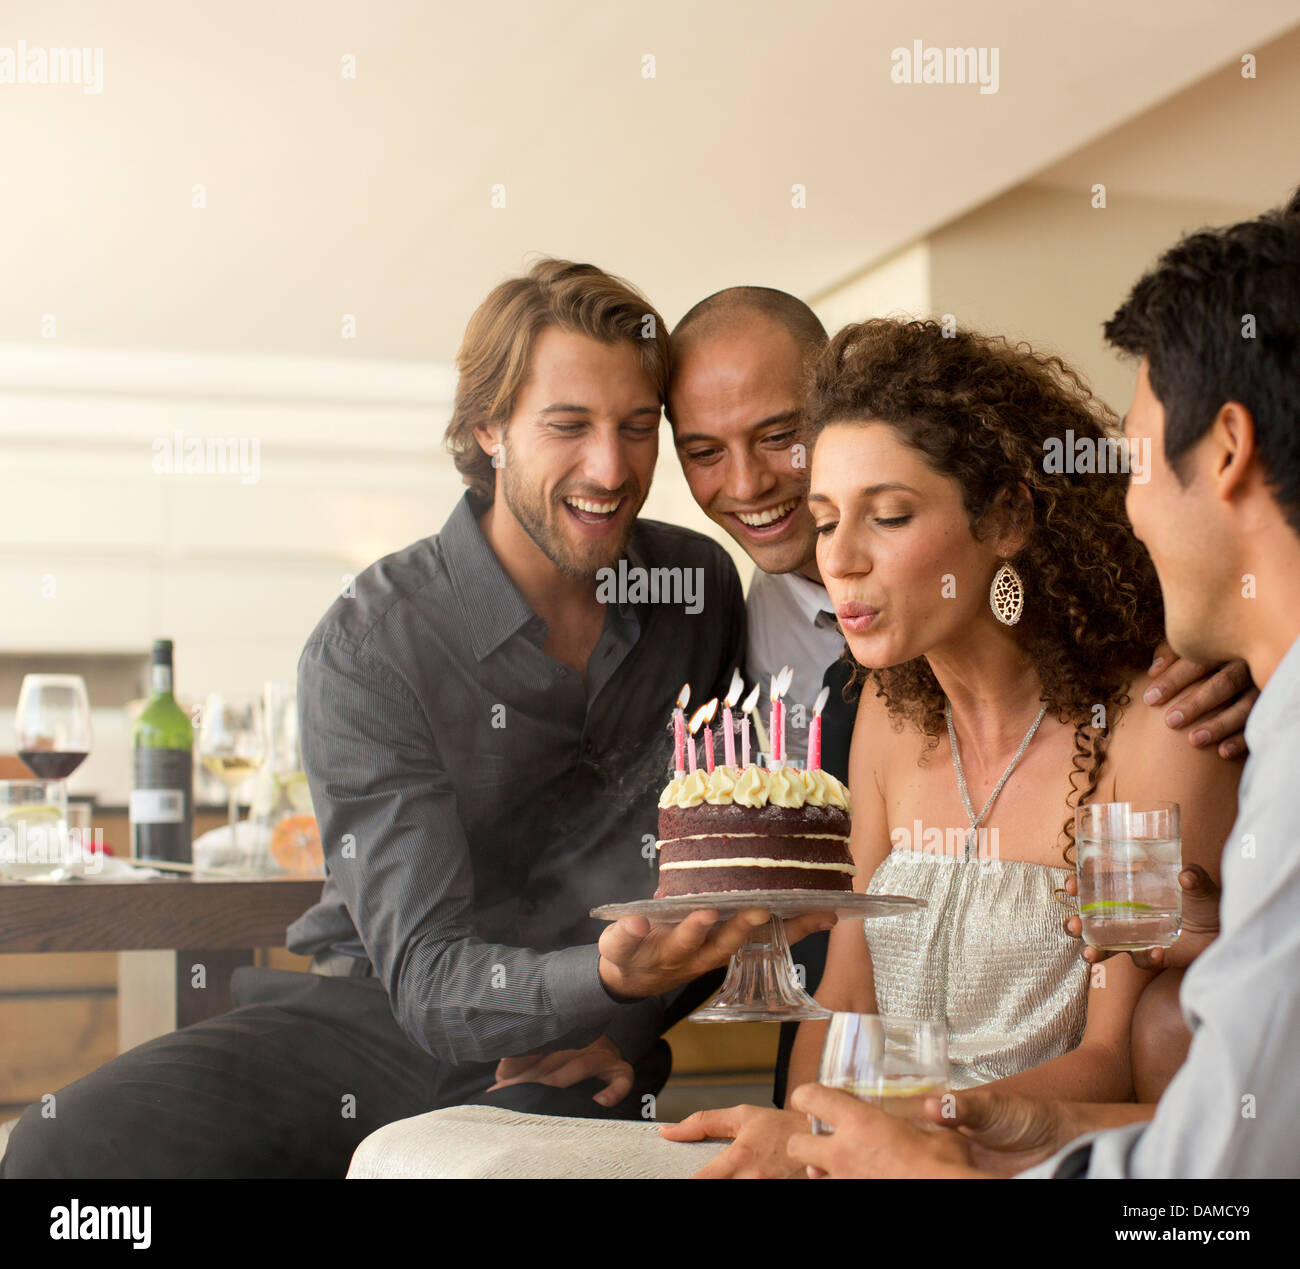 Woman blowing out birthday candles Stock Photo